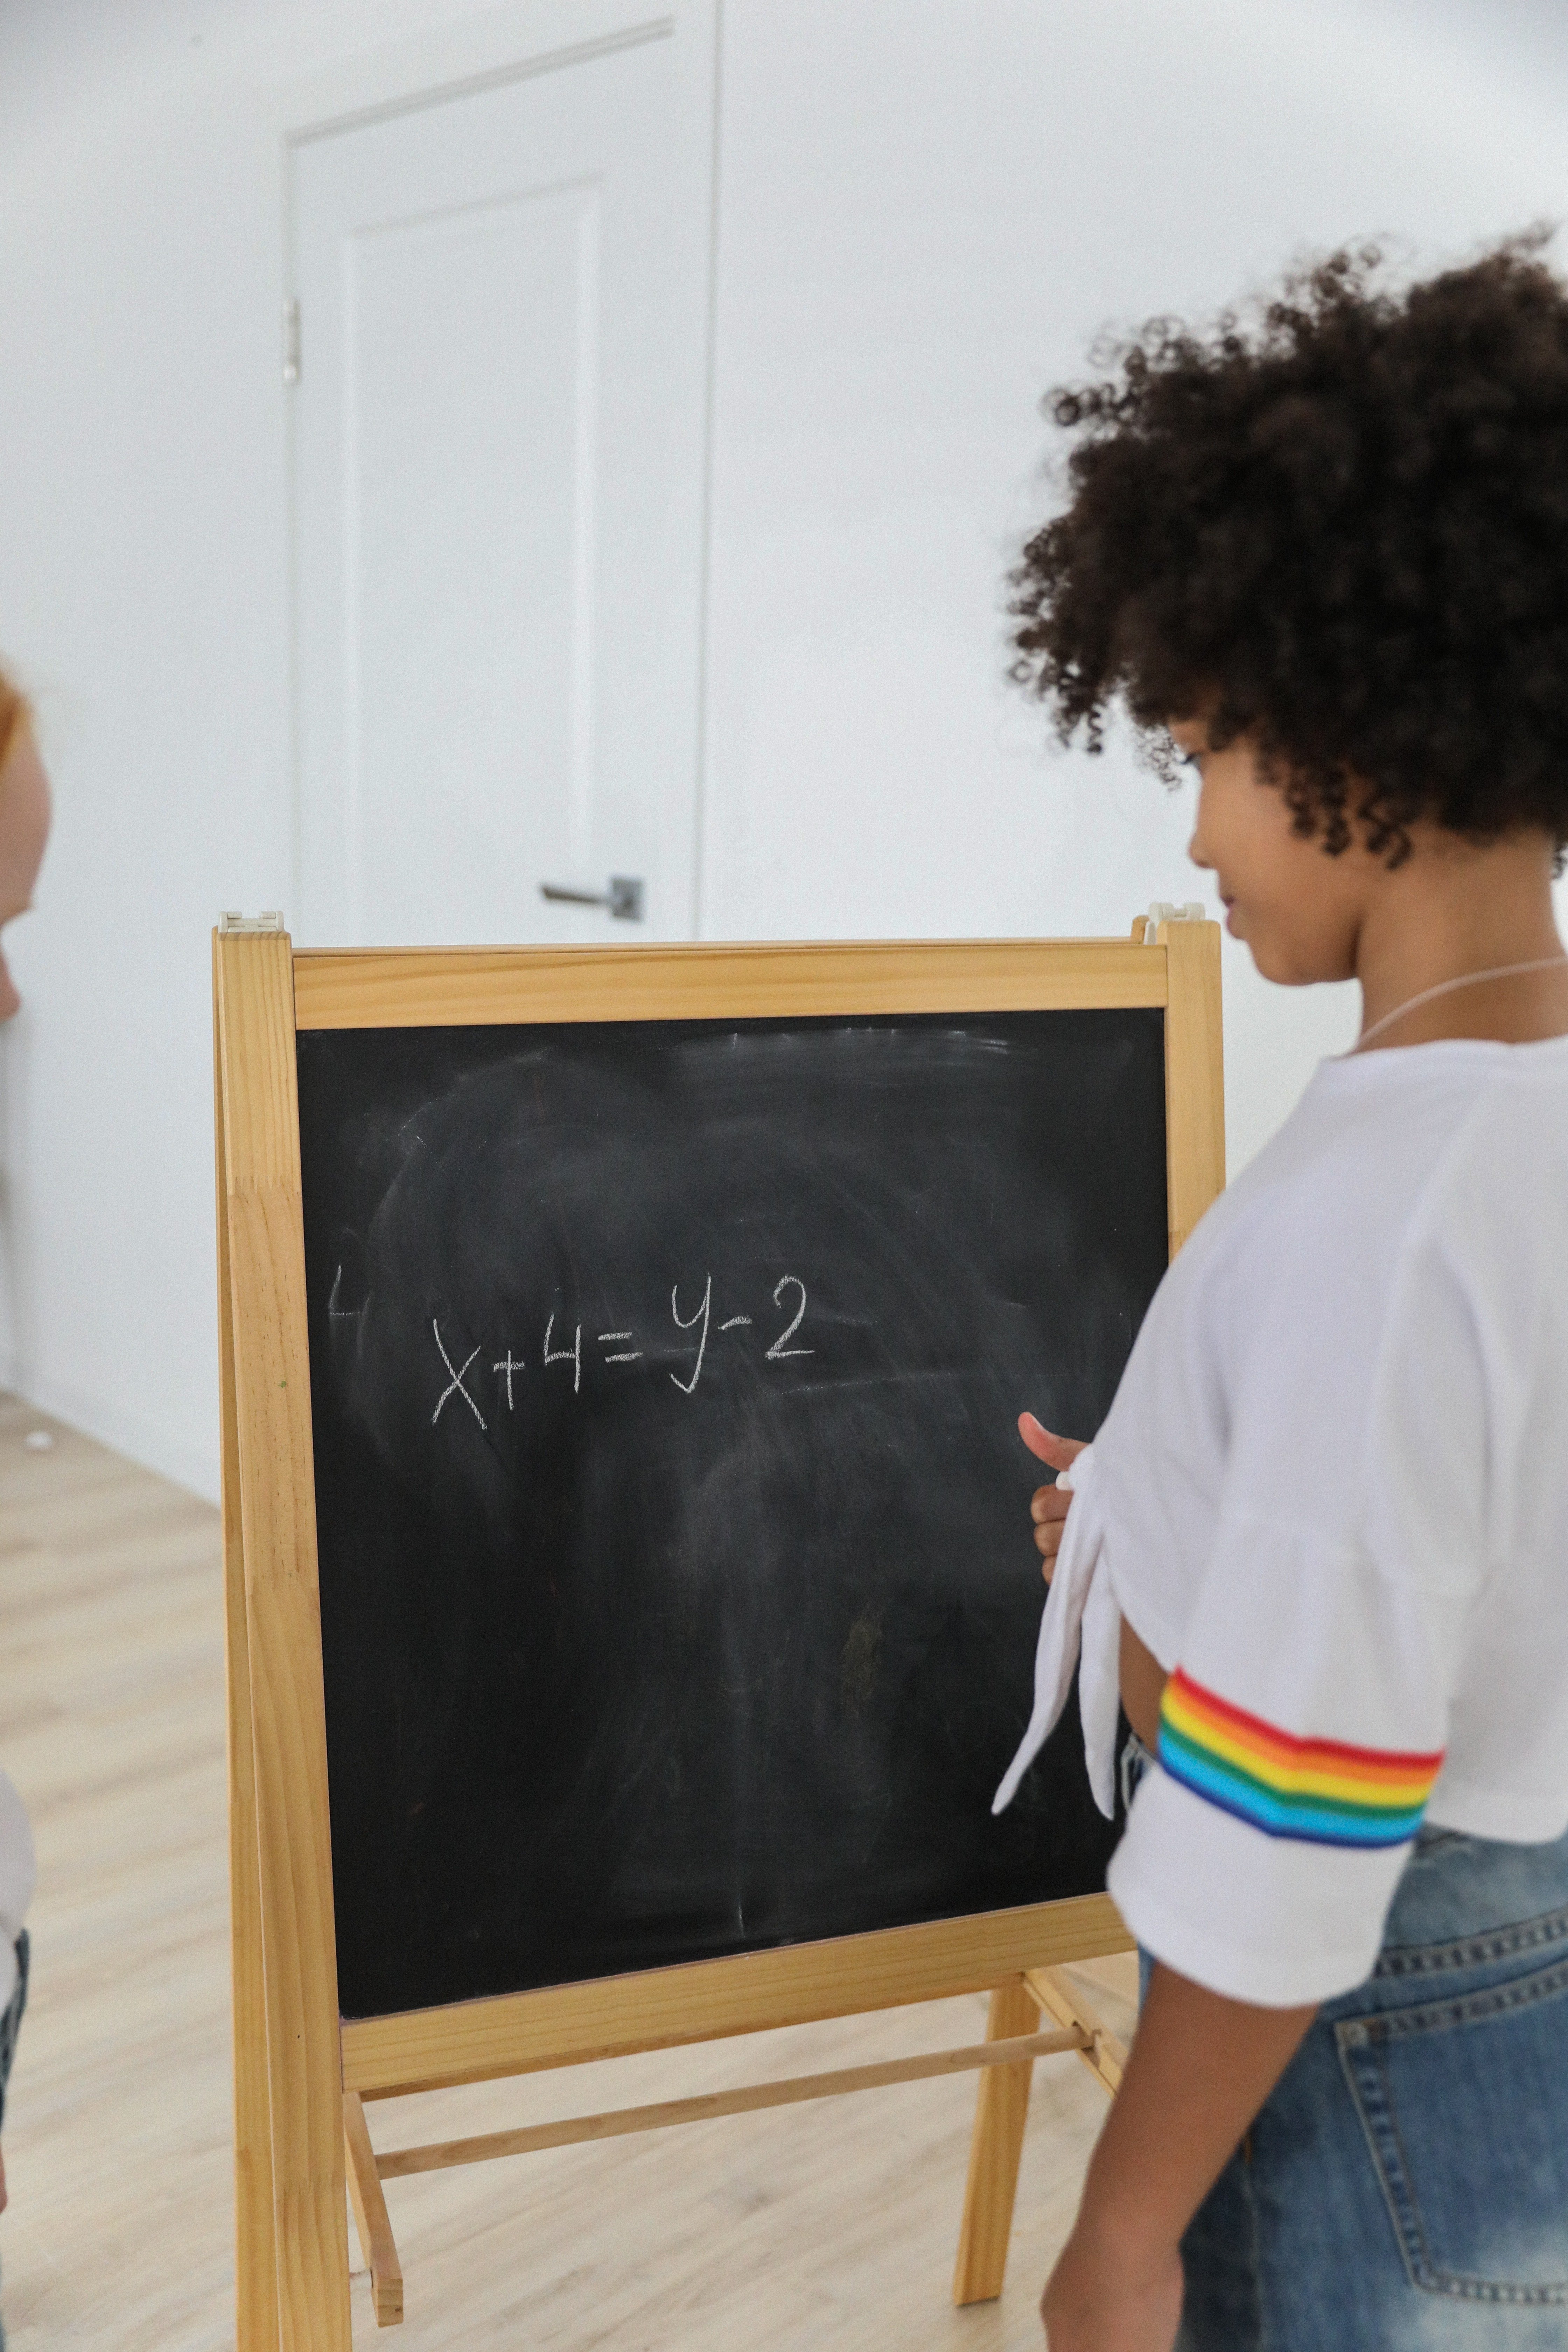 A girl attempts to figure out the equation on the chalkboard in front of her | Photo: Pexels/Monstera 